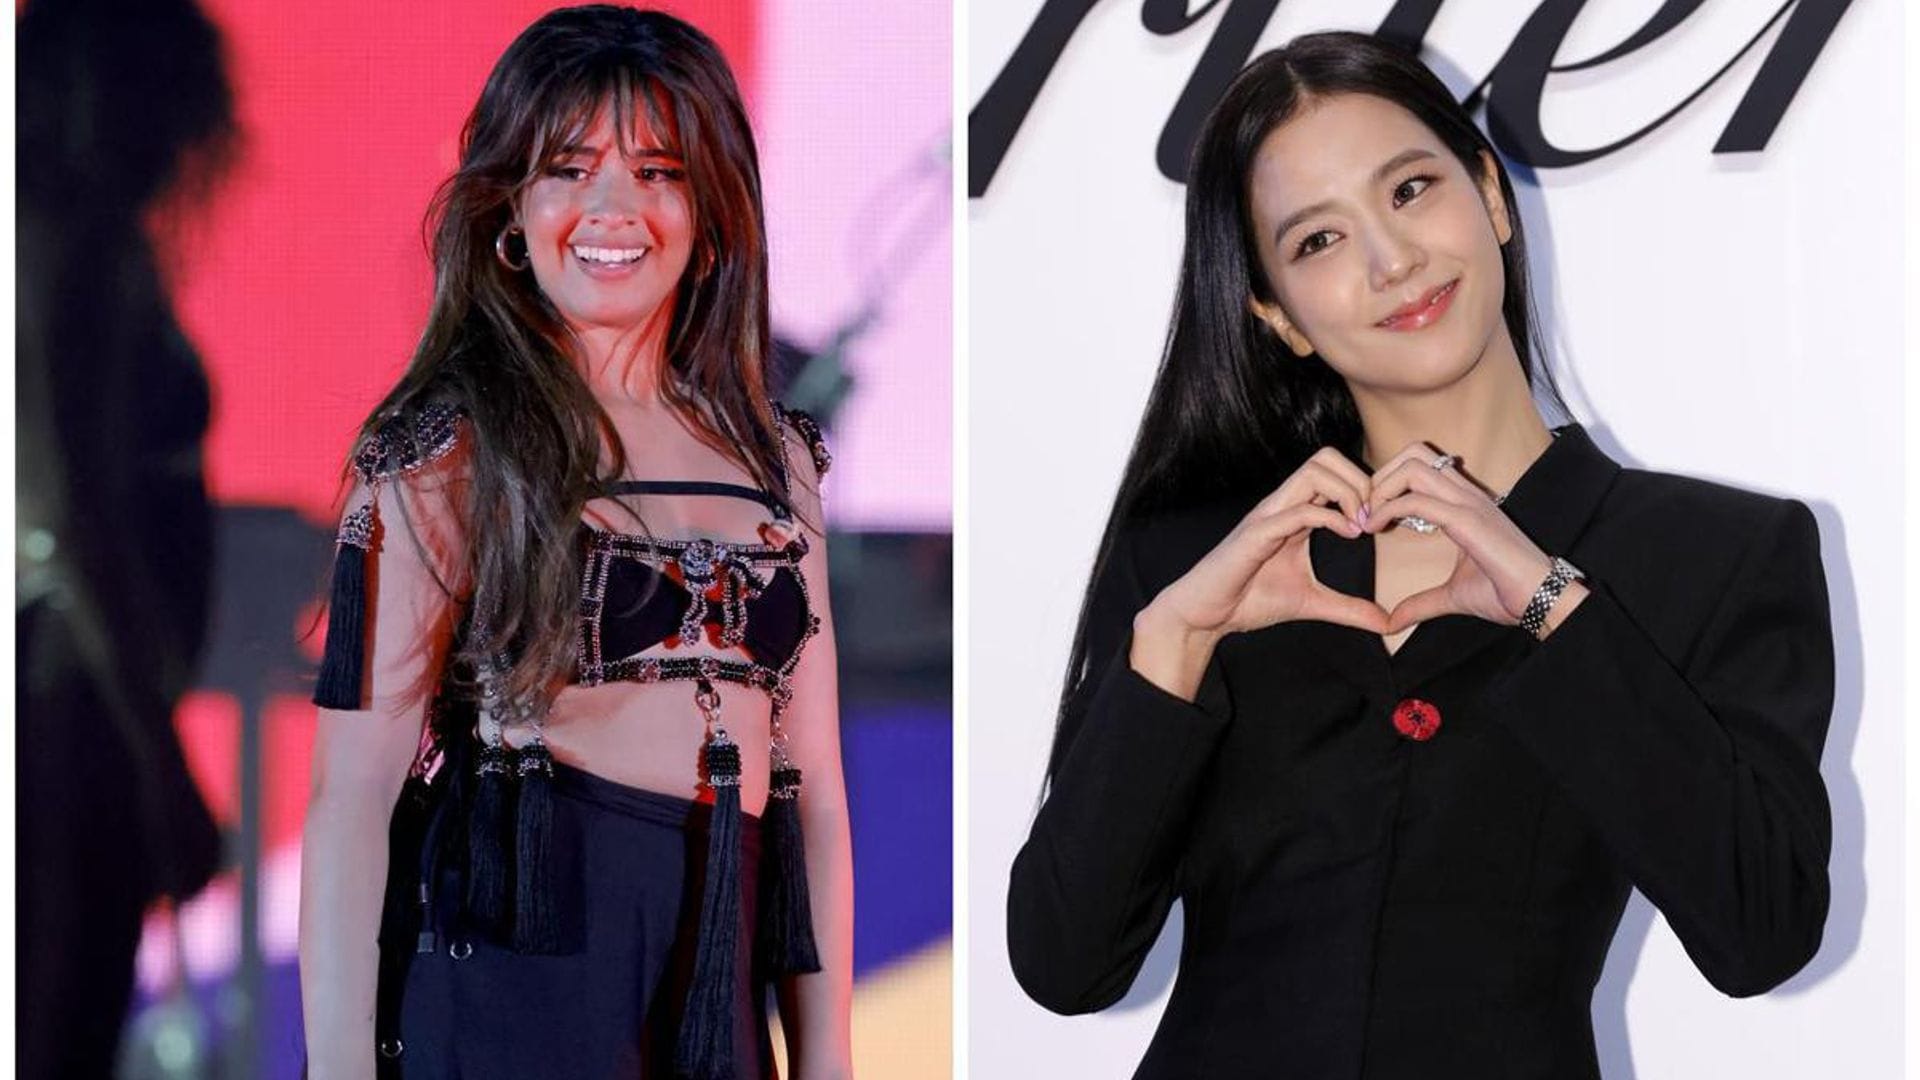 Camila Cabello joins BLACKPINK for surprise performance